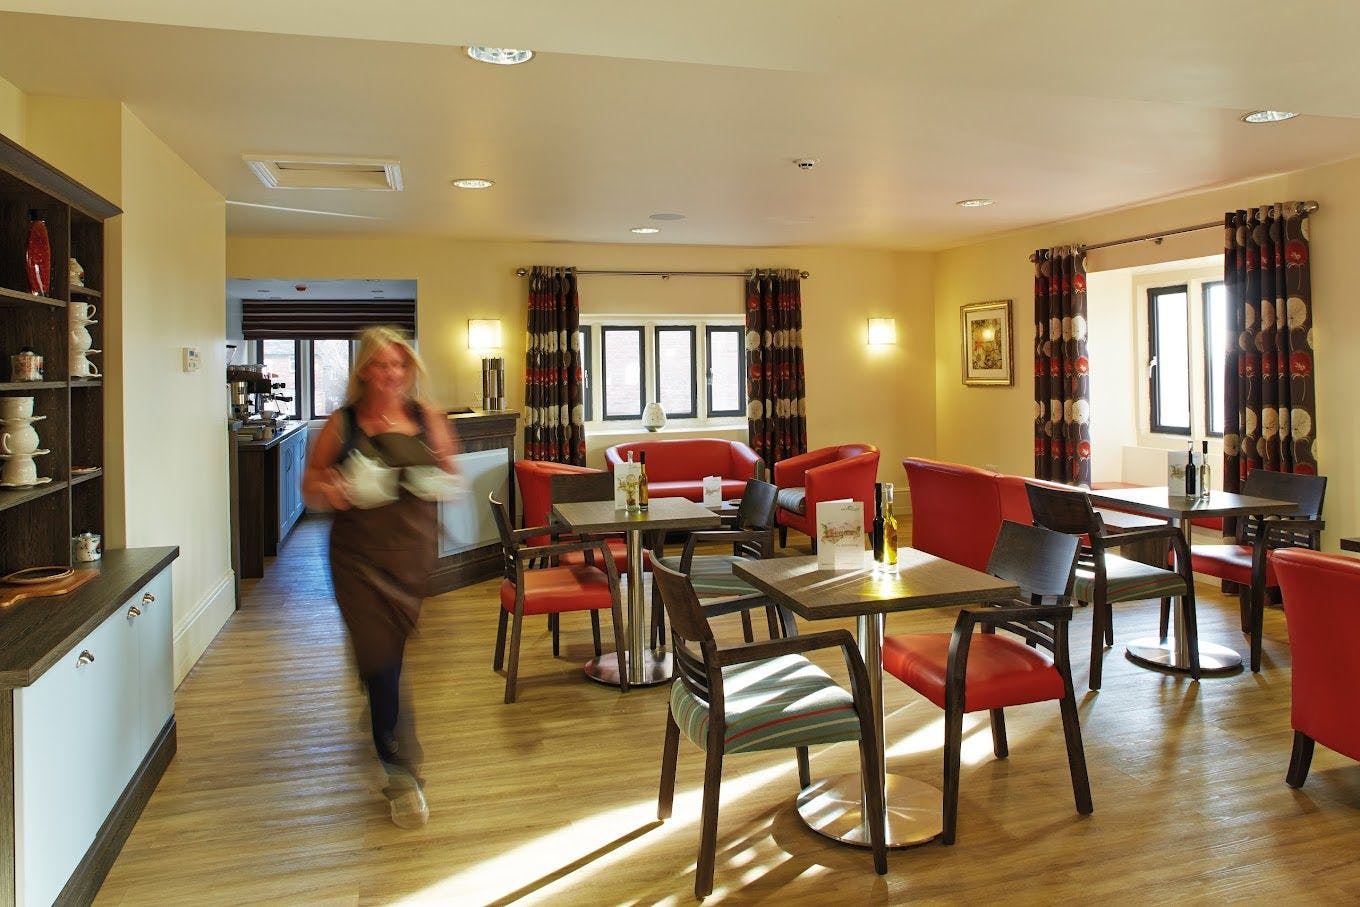 Dining area of Seacroft Grange care home in Leeds, Yorkshire